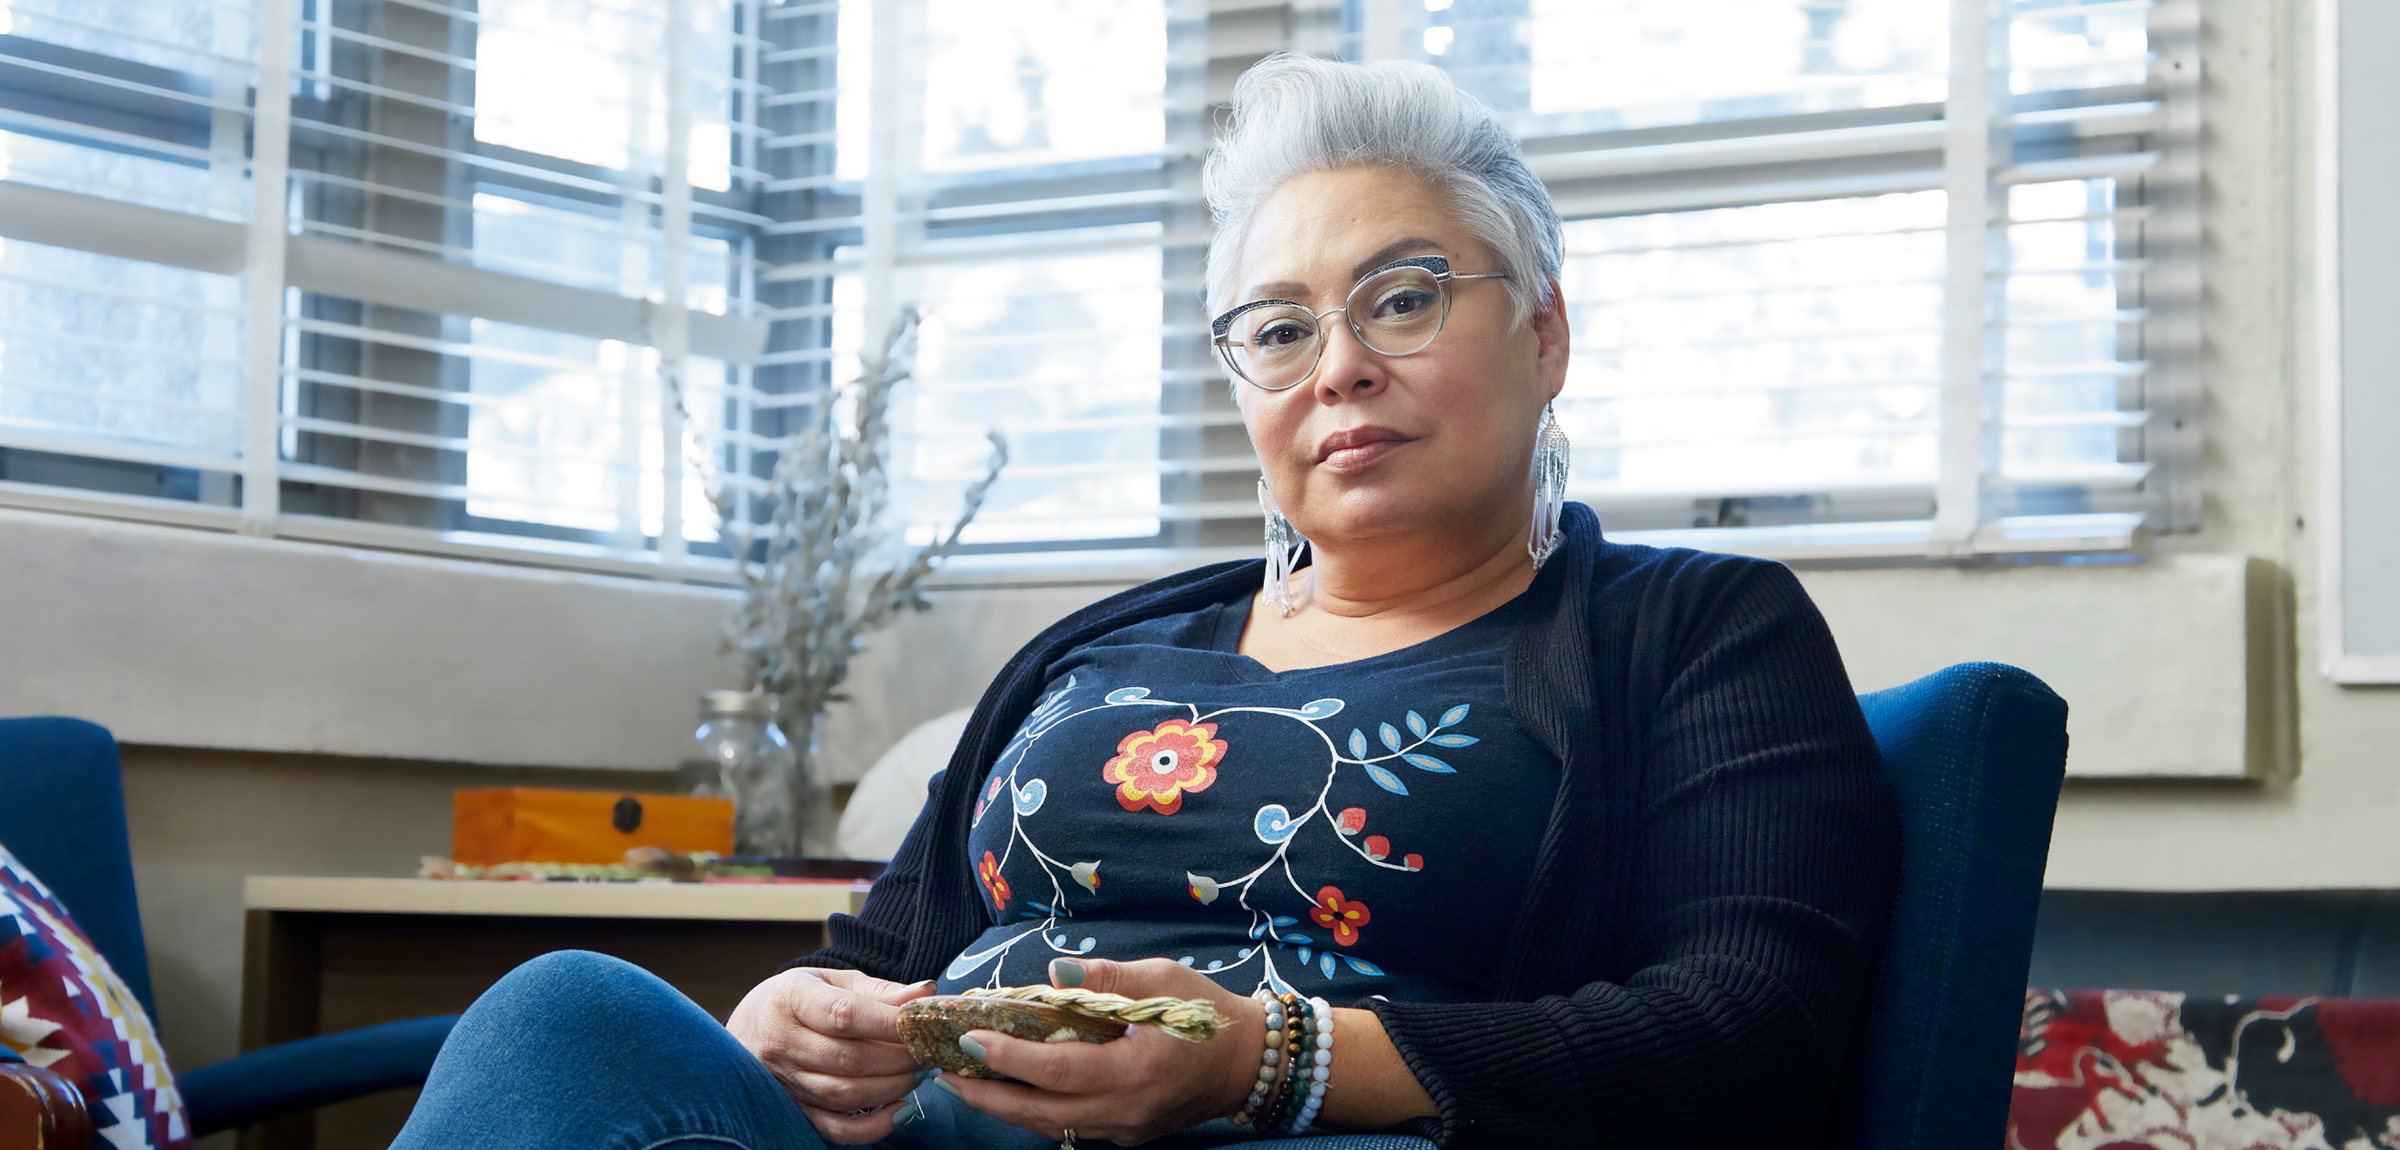 Janis Wasel Bear, an older Indigenous woman with short grey hair and glasses, sits in her office and looks directly into the camera